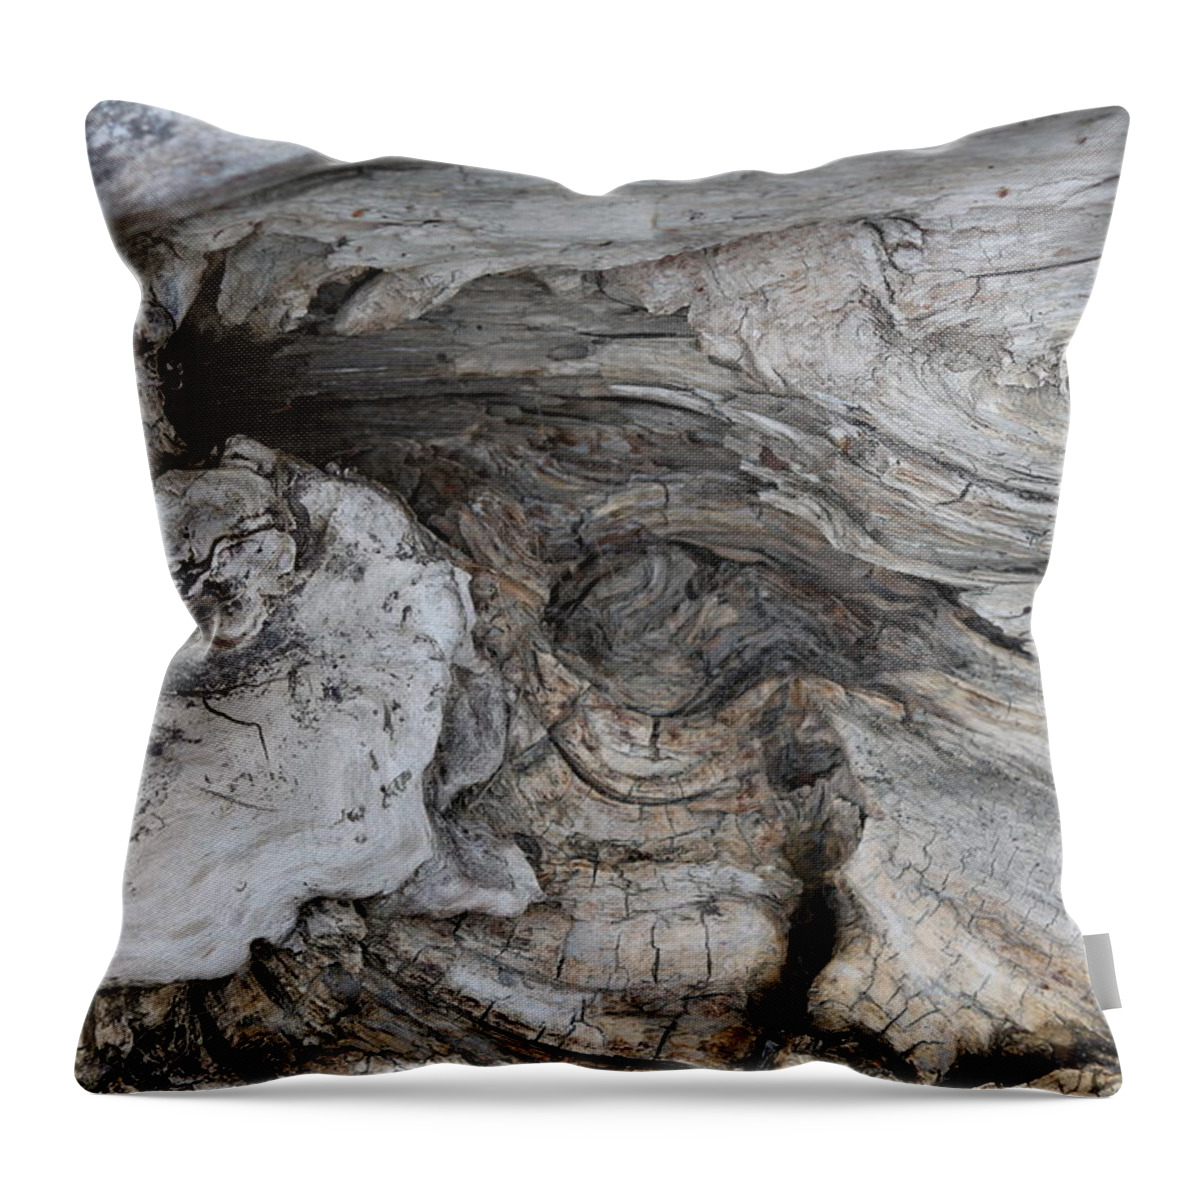 Tidal Throw Pillow featuring the photograph Decomposition - whorled by Annekathrin Hansen